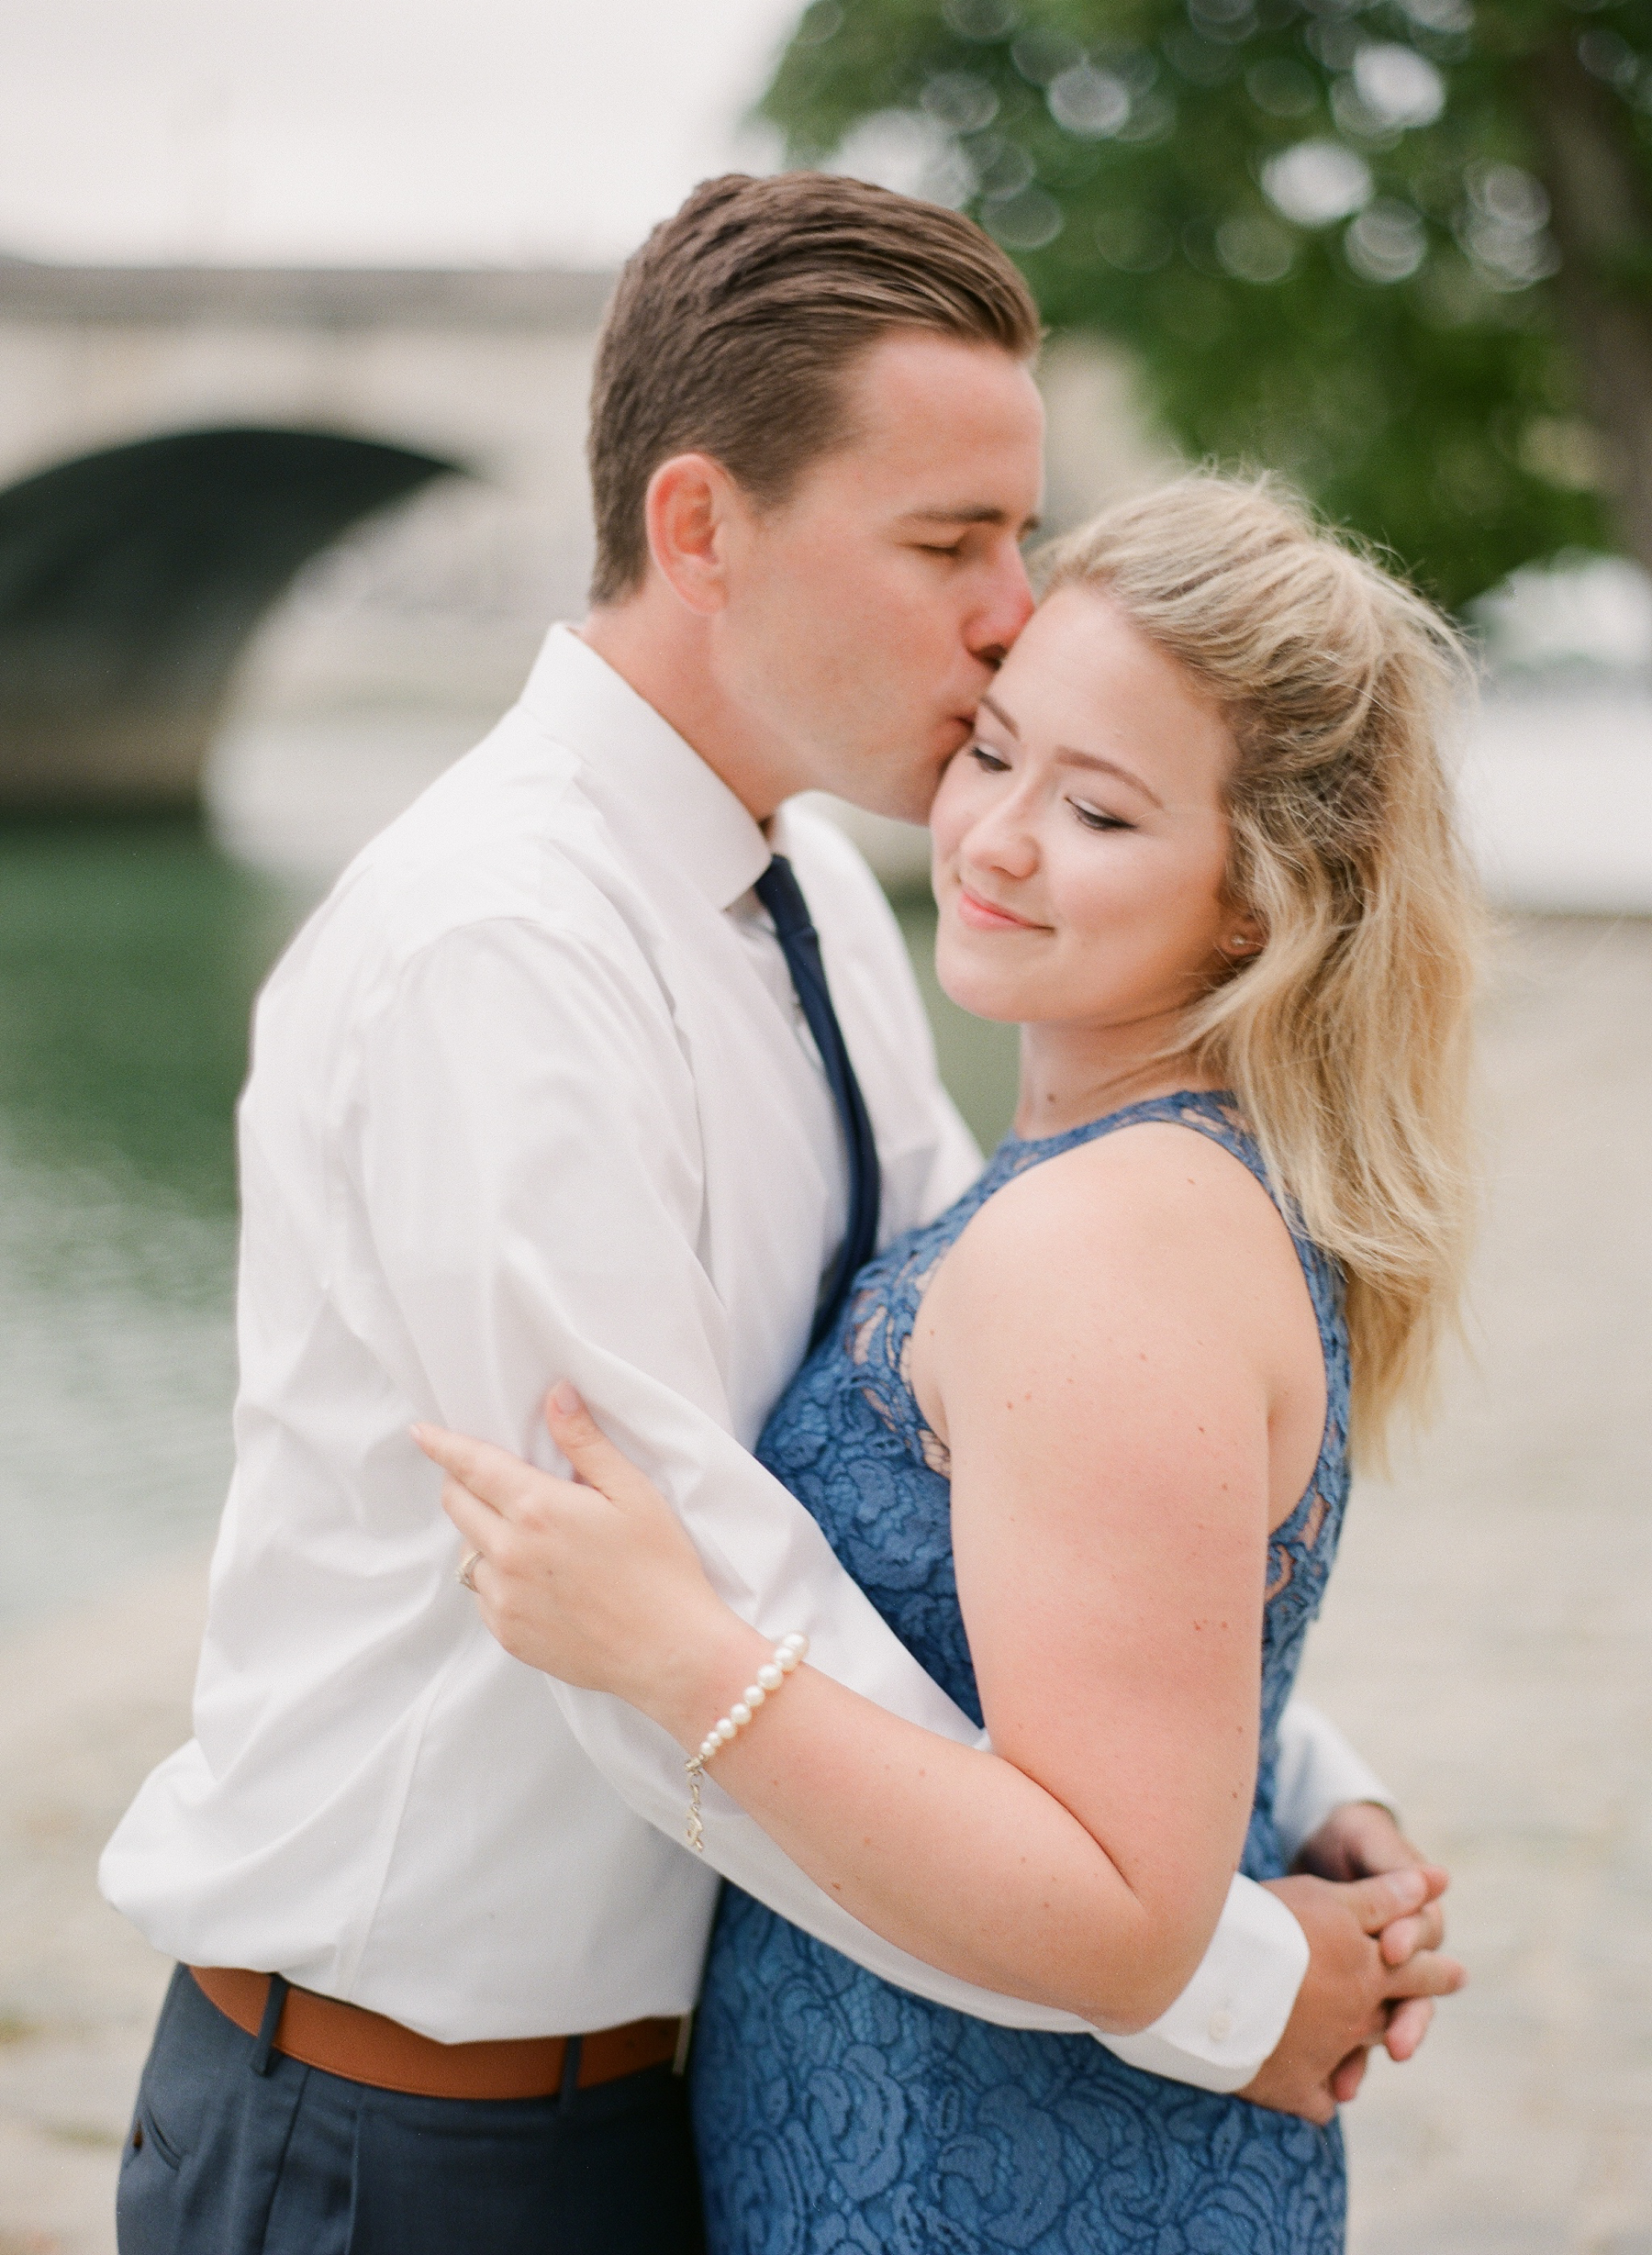 Paris Honeymoon Photographer | France Wedding Photographer | Paris Film Photography | Molly Carr Photography | Bride And Groom Kissing At The Seine | Girl In Blue Lace JCrew Dress